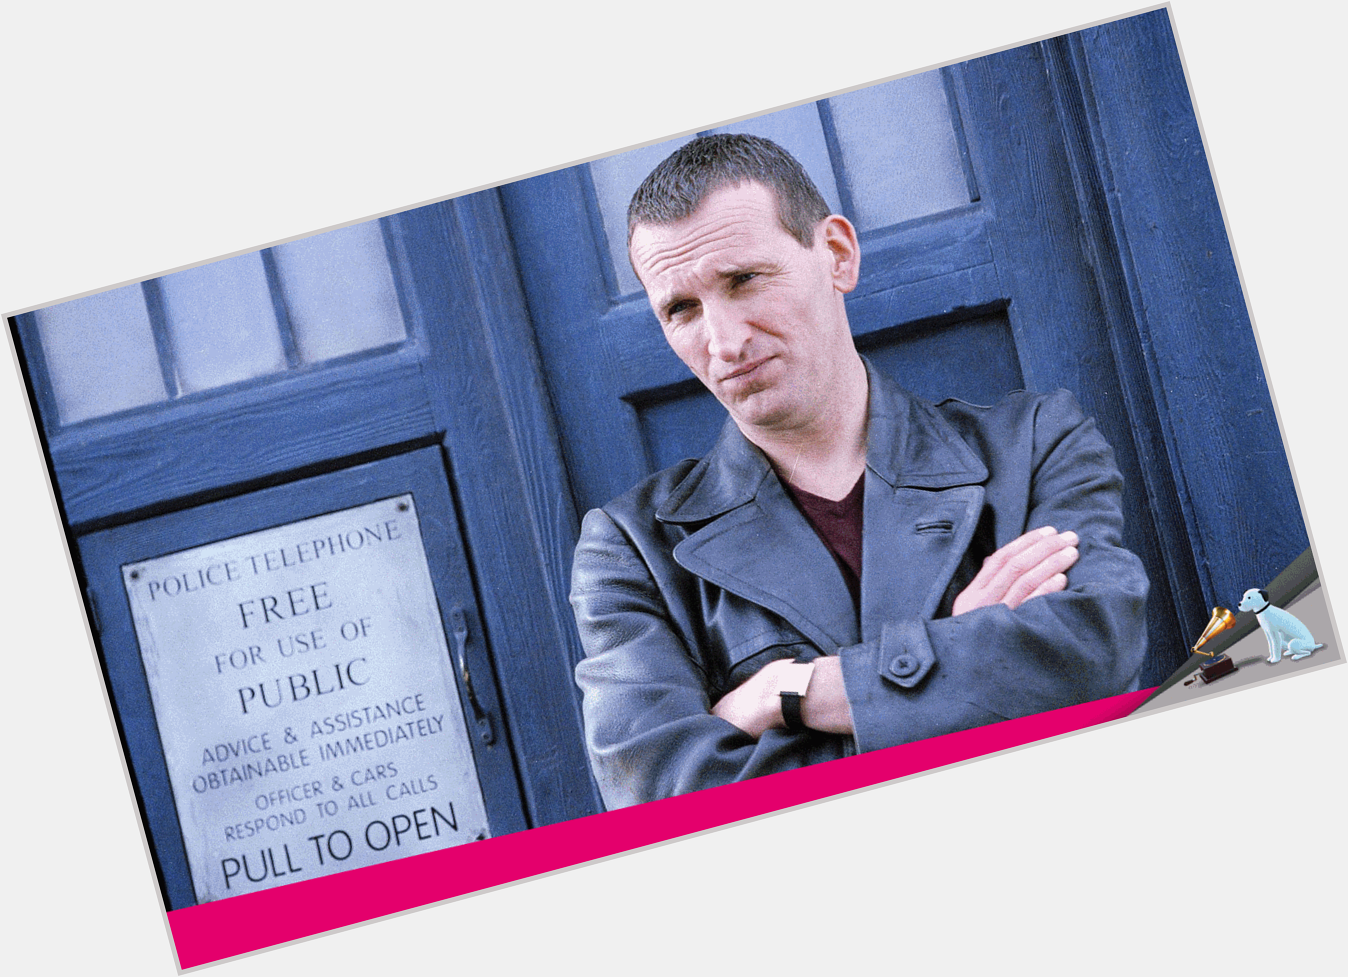 Happy 55th birthday to the ninth doctor, Christopher Eccleston! 